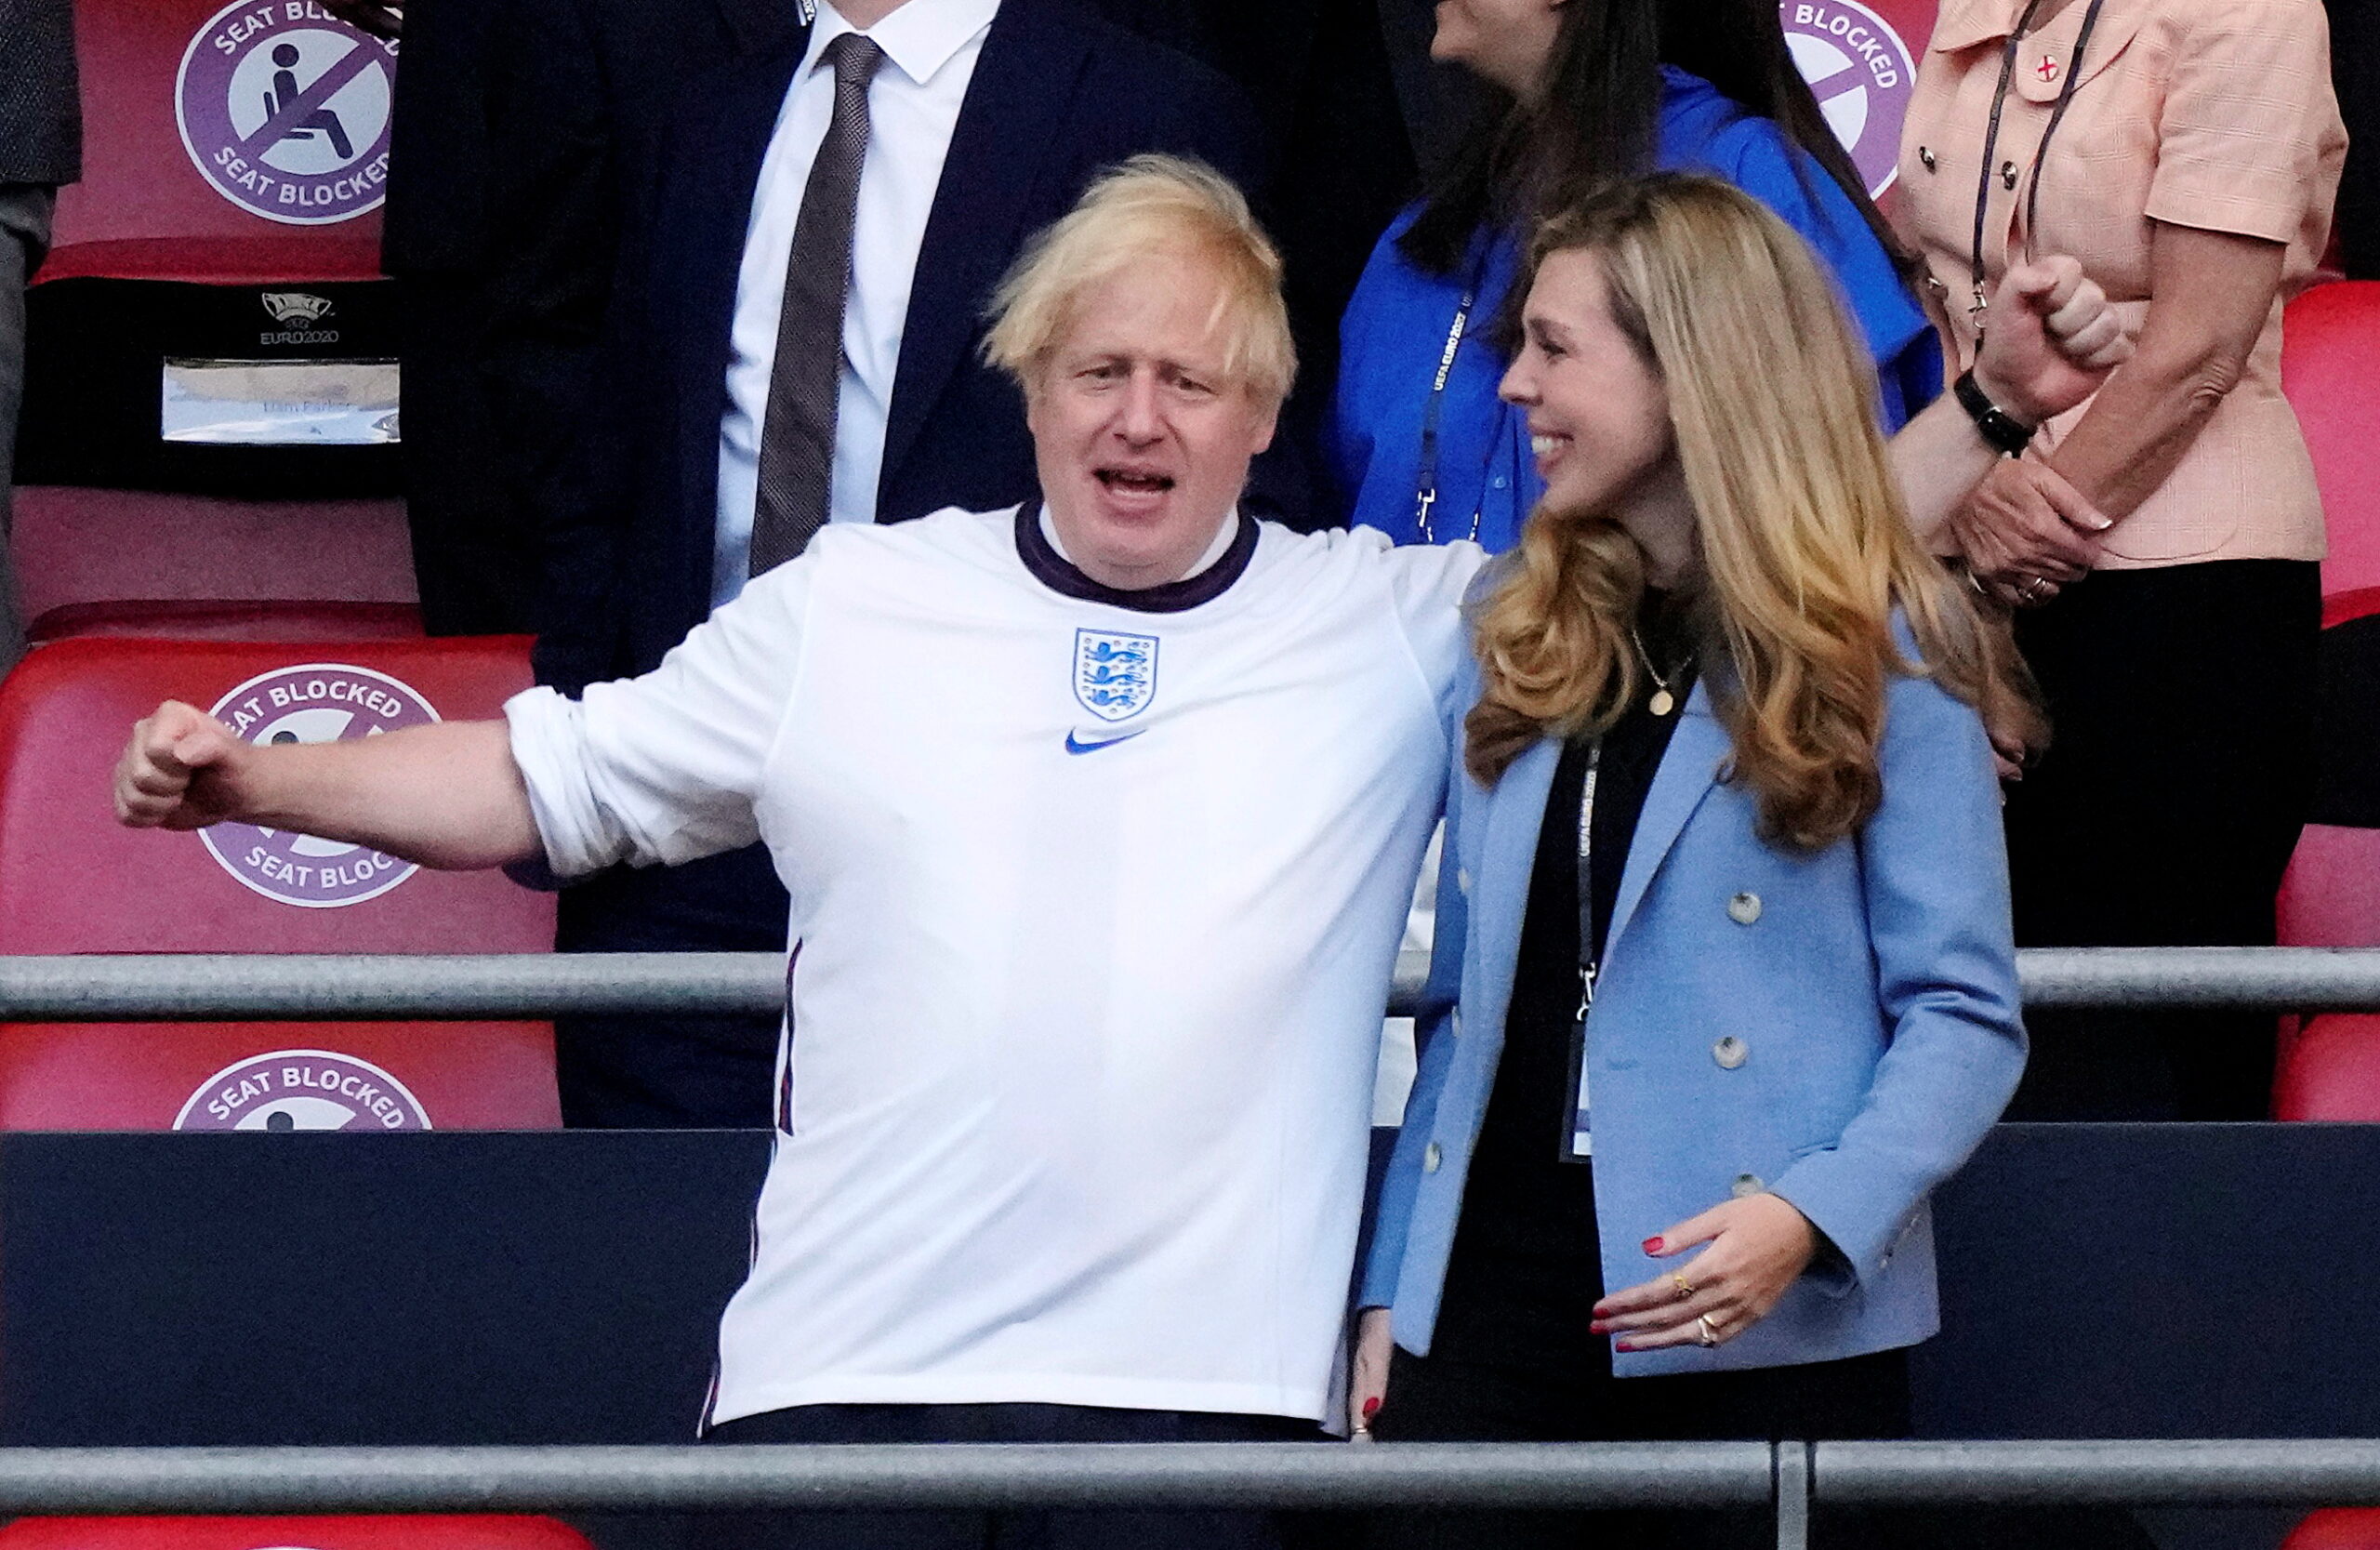 Soccer Football - Euro 2020 - Semi Final - England v Denmark - Wembley Stadium, London, Britain - July 7, 2021 Britain's Prime Minister Boris Johnson with his wife Carrie Johnson in the stands before the match Pool via REUTERS/Frank Augstein